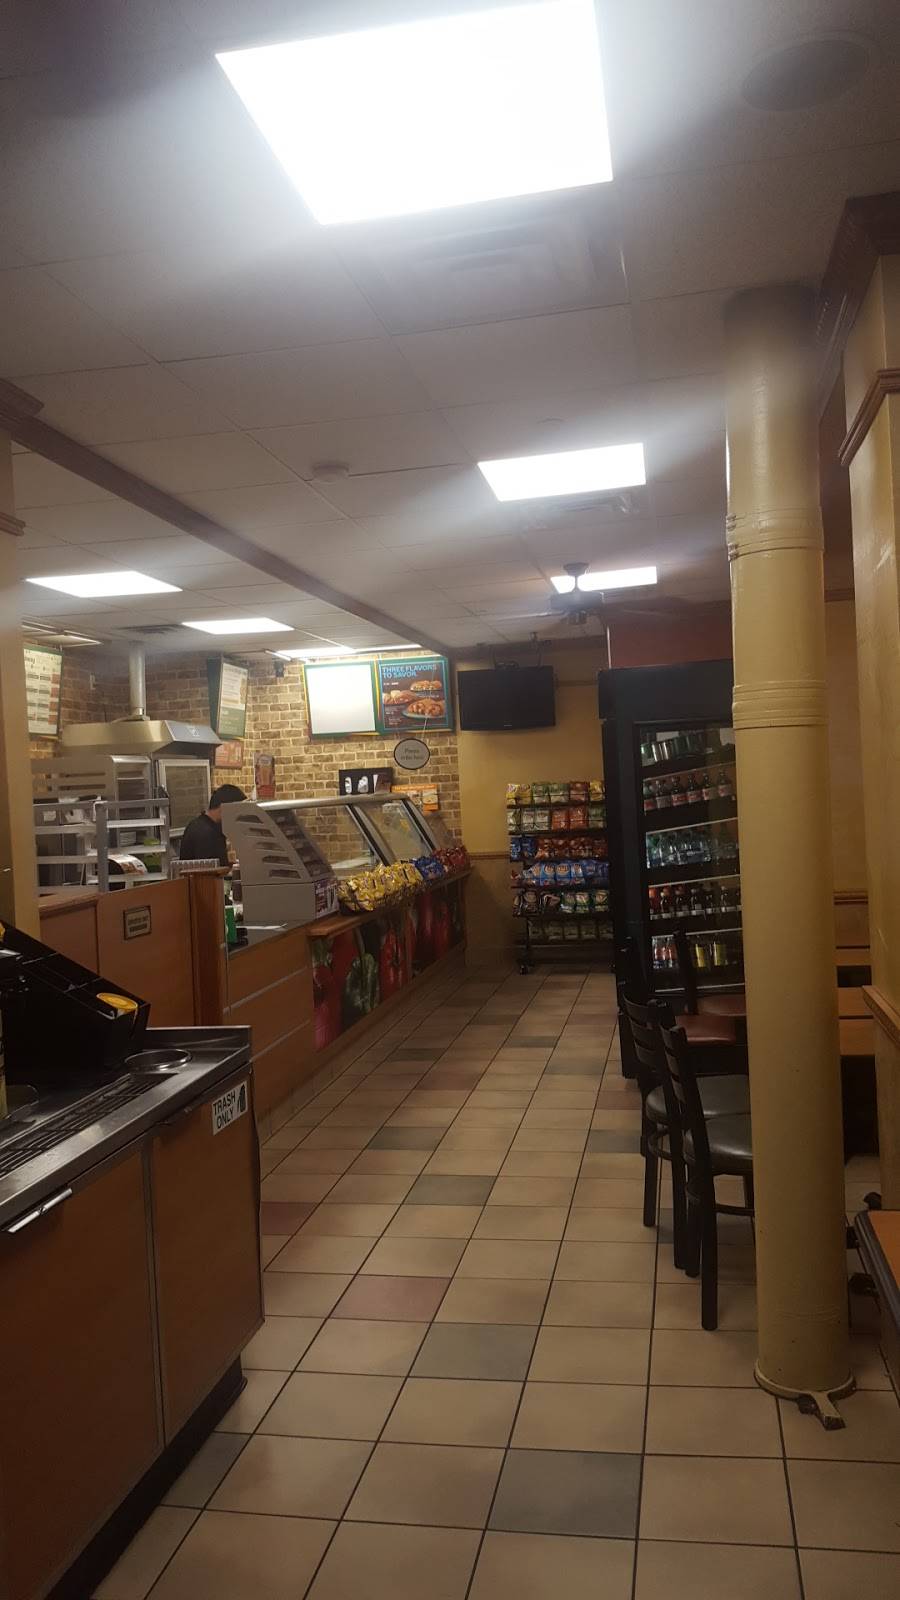 Subway Restaurants | restaurant | 555 West 42nd Street, Suite 14, Riverbank West, New York, NY 10036, USA | 2125945900 OR +1 212-594-5900